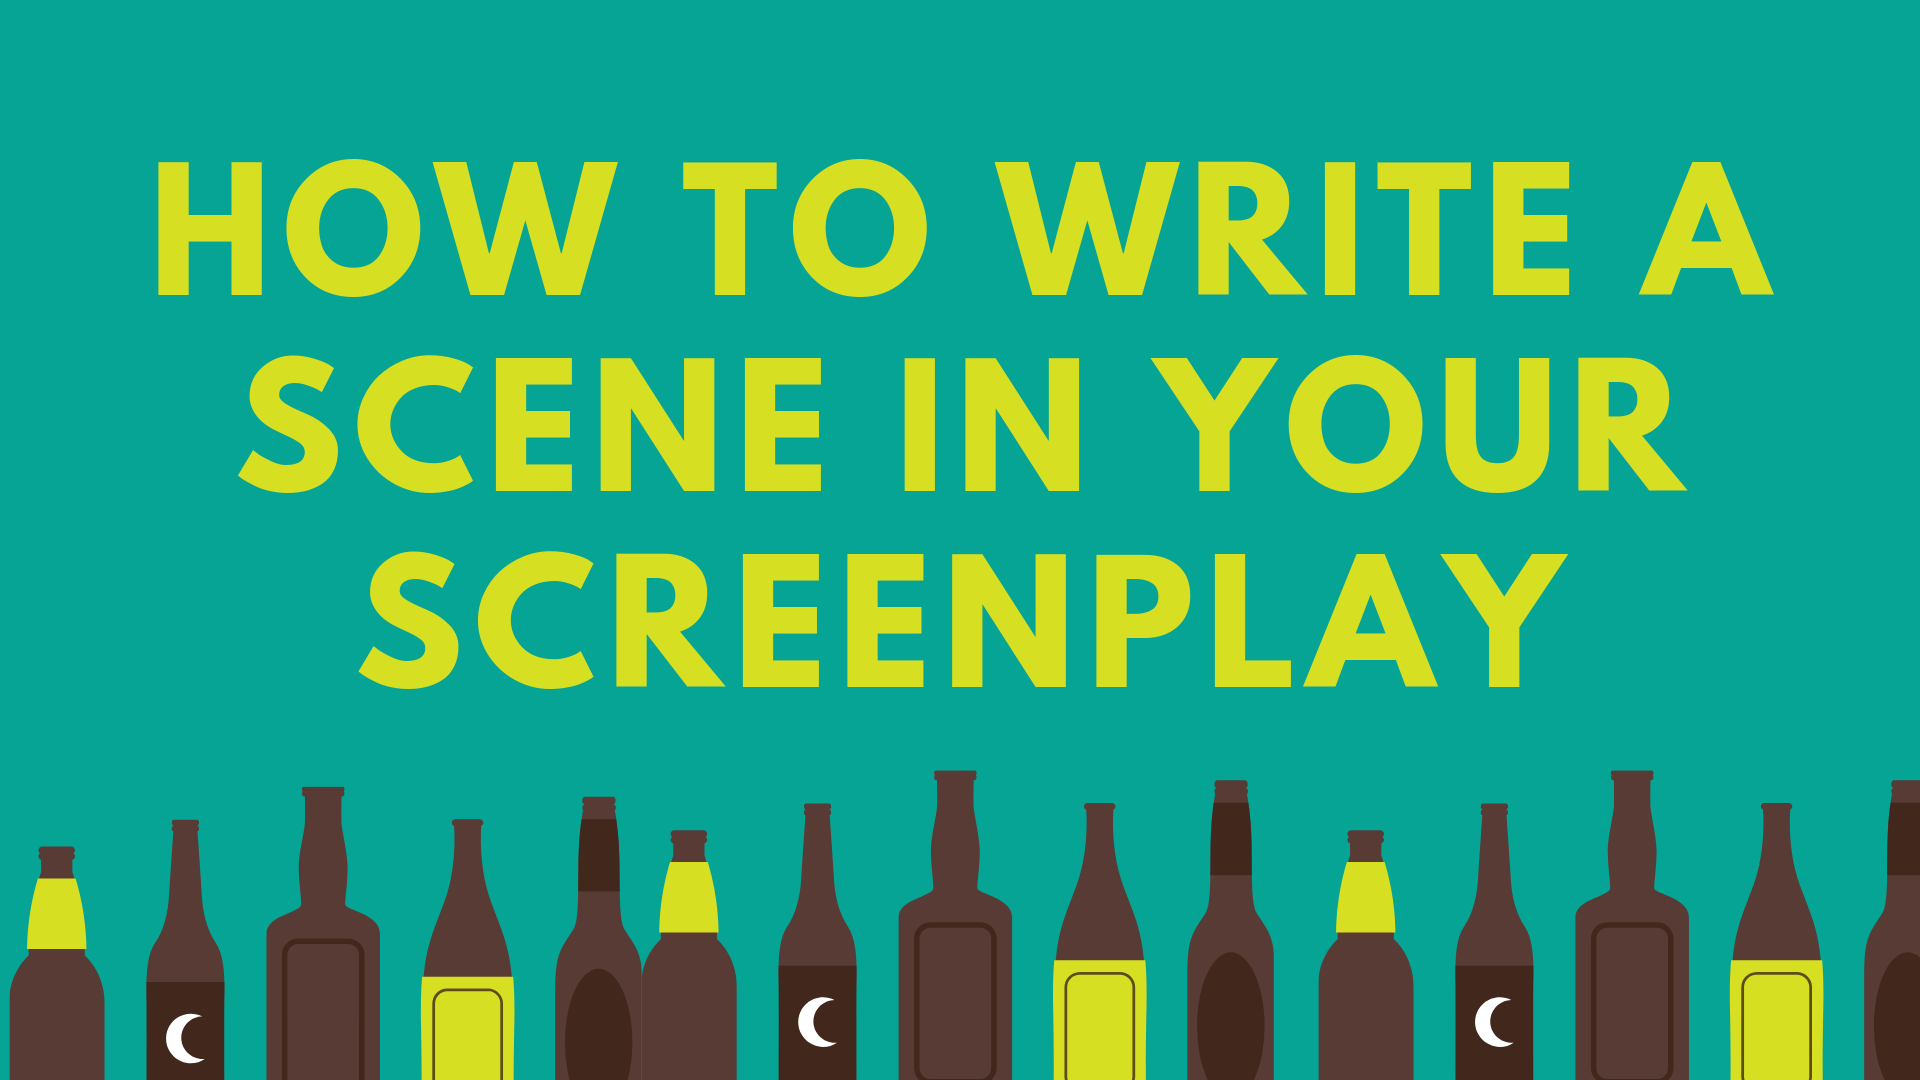 How To Write A Scene in Your Screenplay